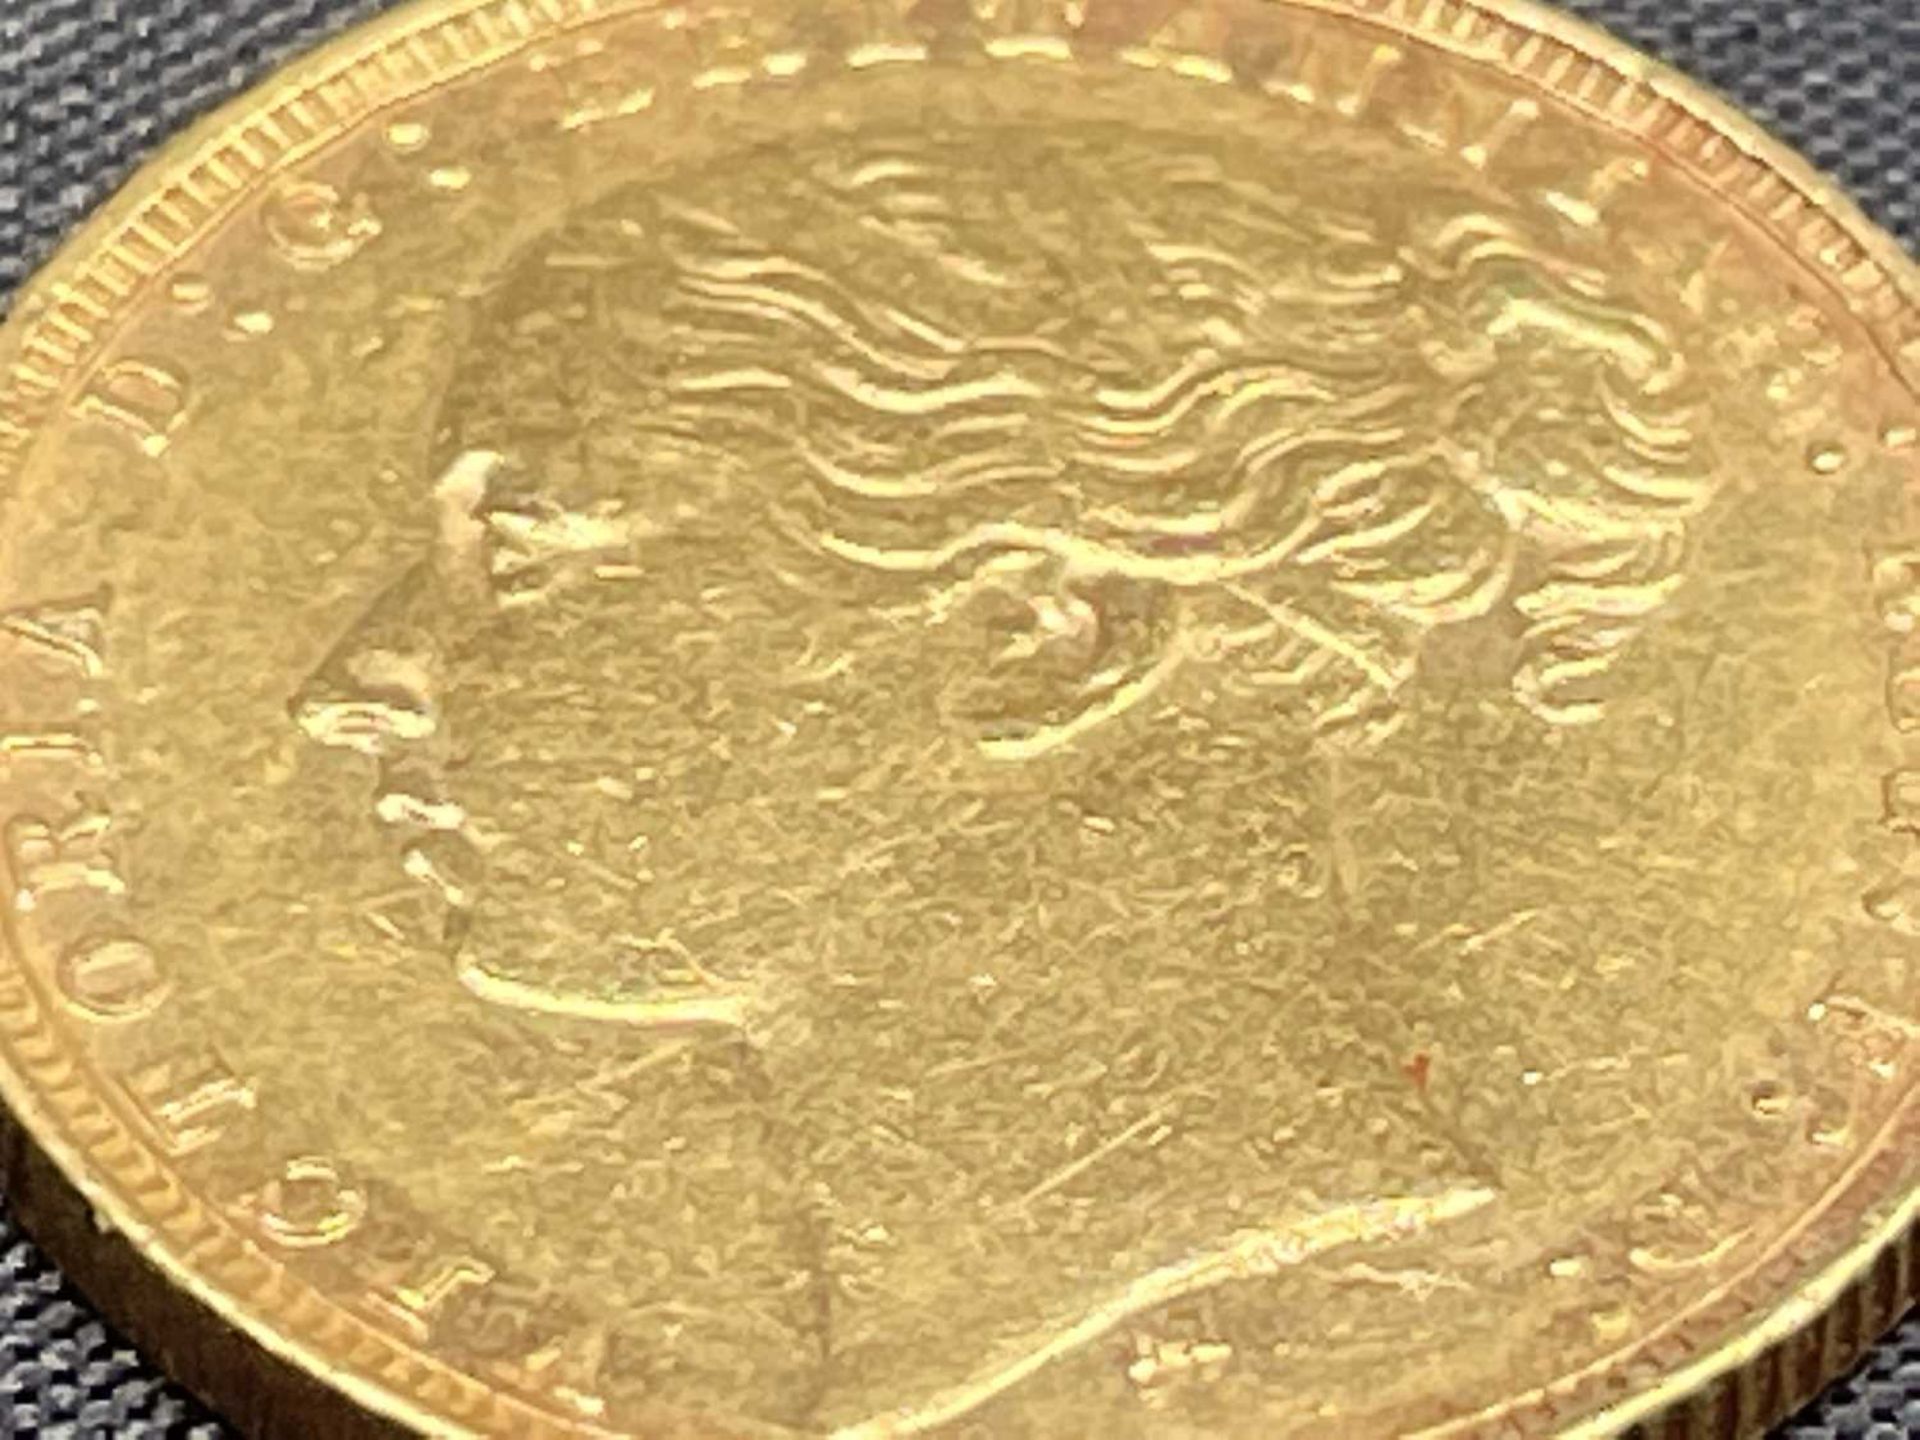 Great Britain Gold Sovereign 1879 George & Dragon Melbourne mint mark. Note: Melbourne mint mark - Image 5 of 5